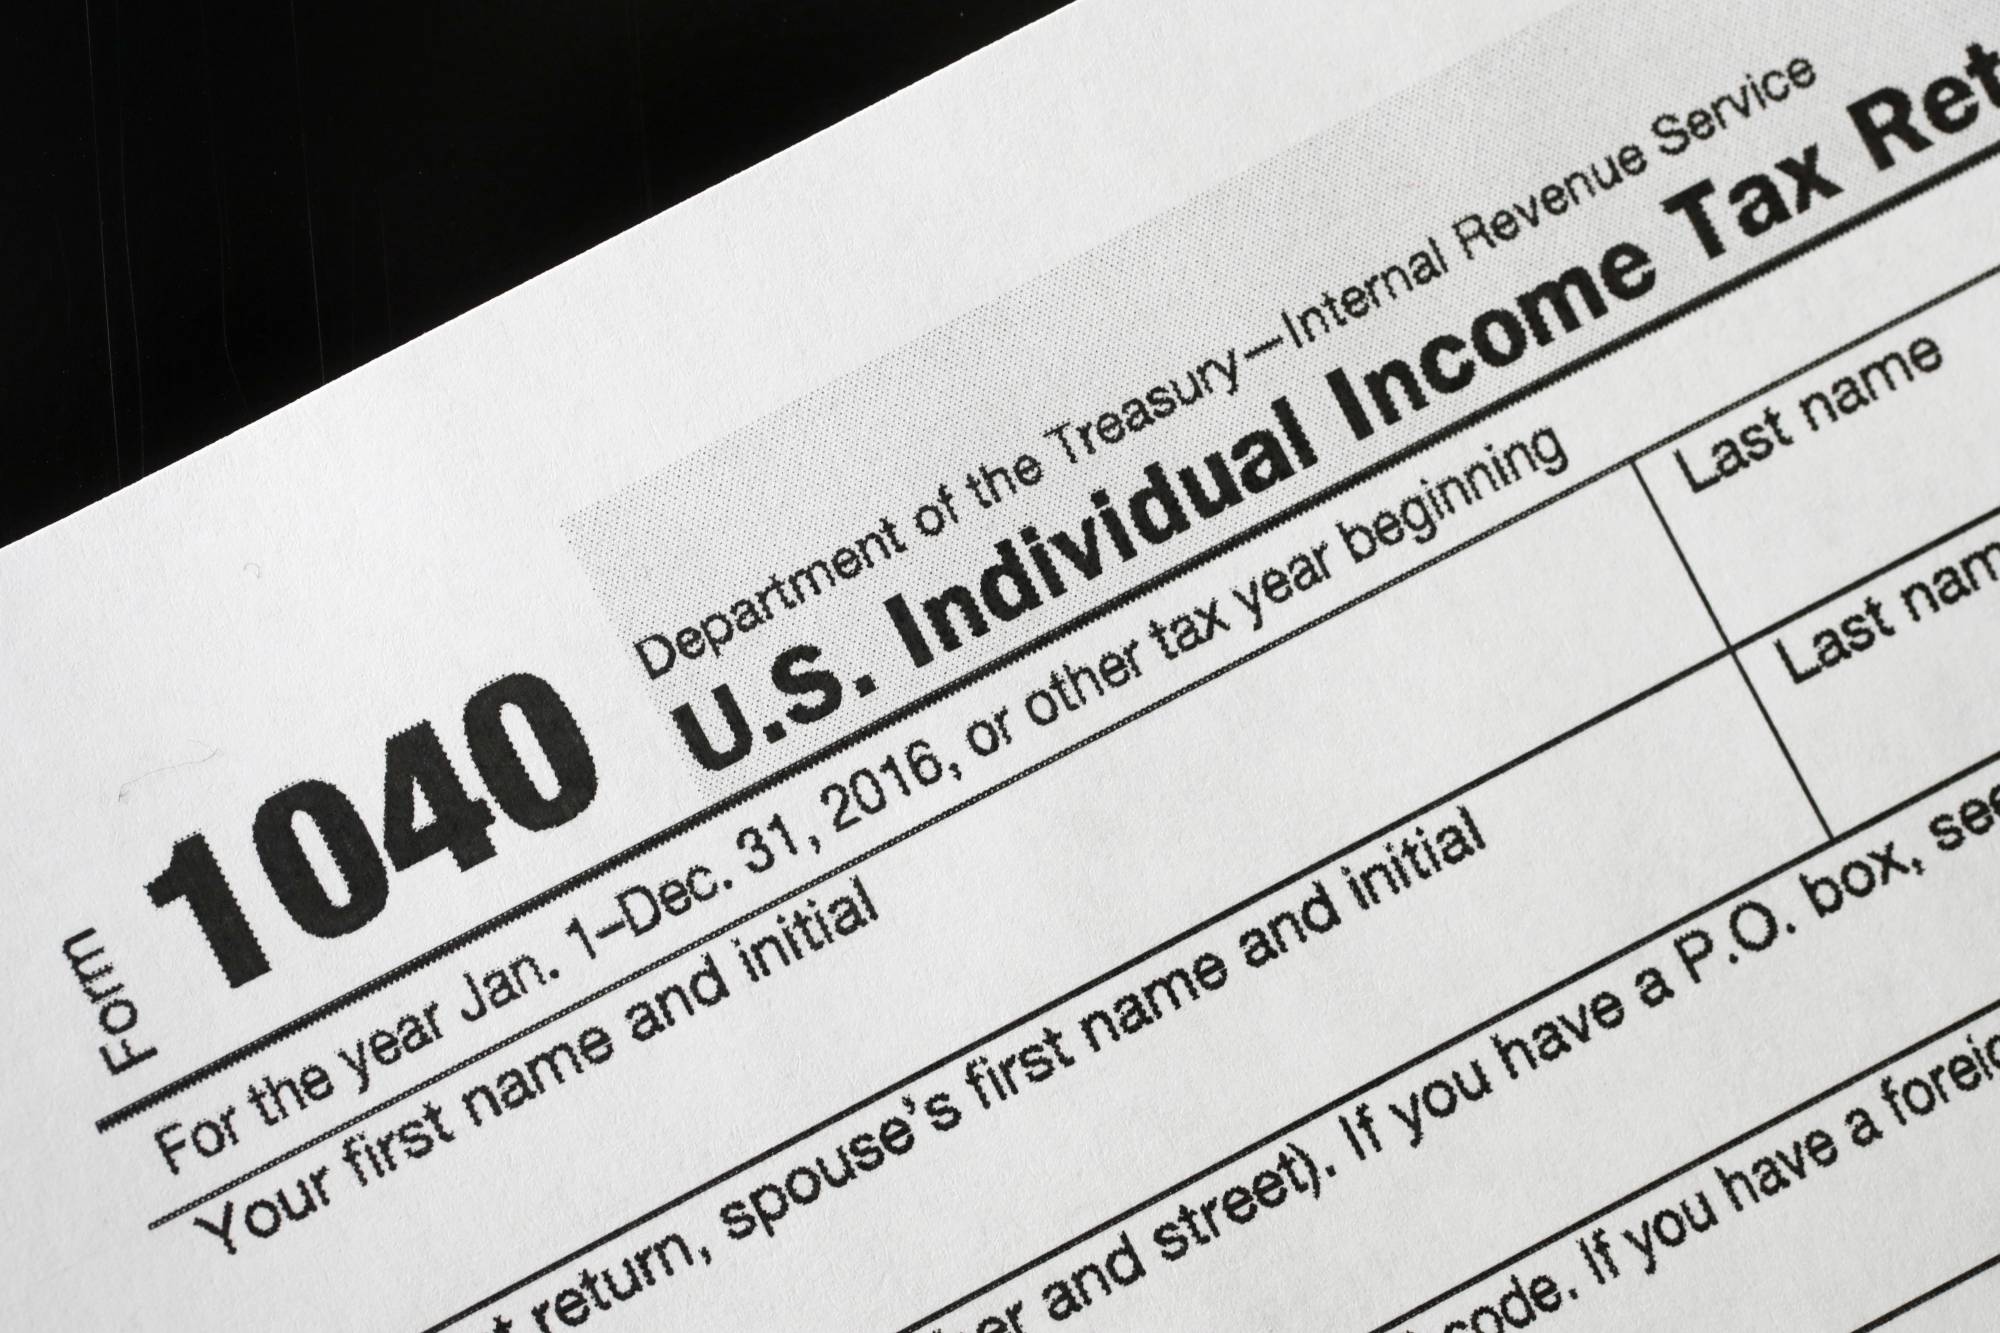 A 1040 tax form appears on display, Tuesday, Jan. 10, 2017, in New York. The IRS is delaying tax refunds for millions of low-income families as the agency steps up efforts to combat identity theft and fraud. Starting in 2017, a federal law requires the tax agency to delay refunds until Feb. 15 for people who claim the earned income tax credit and the additional child tax credit. The IRS says processing times will delay most of the refunds until the end of February. (AP Photo/Mark Lennihan)